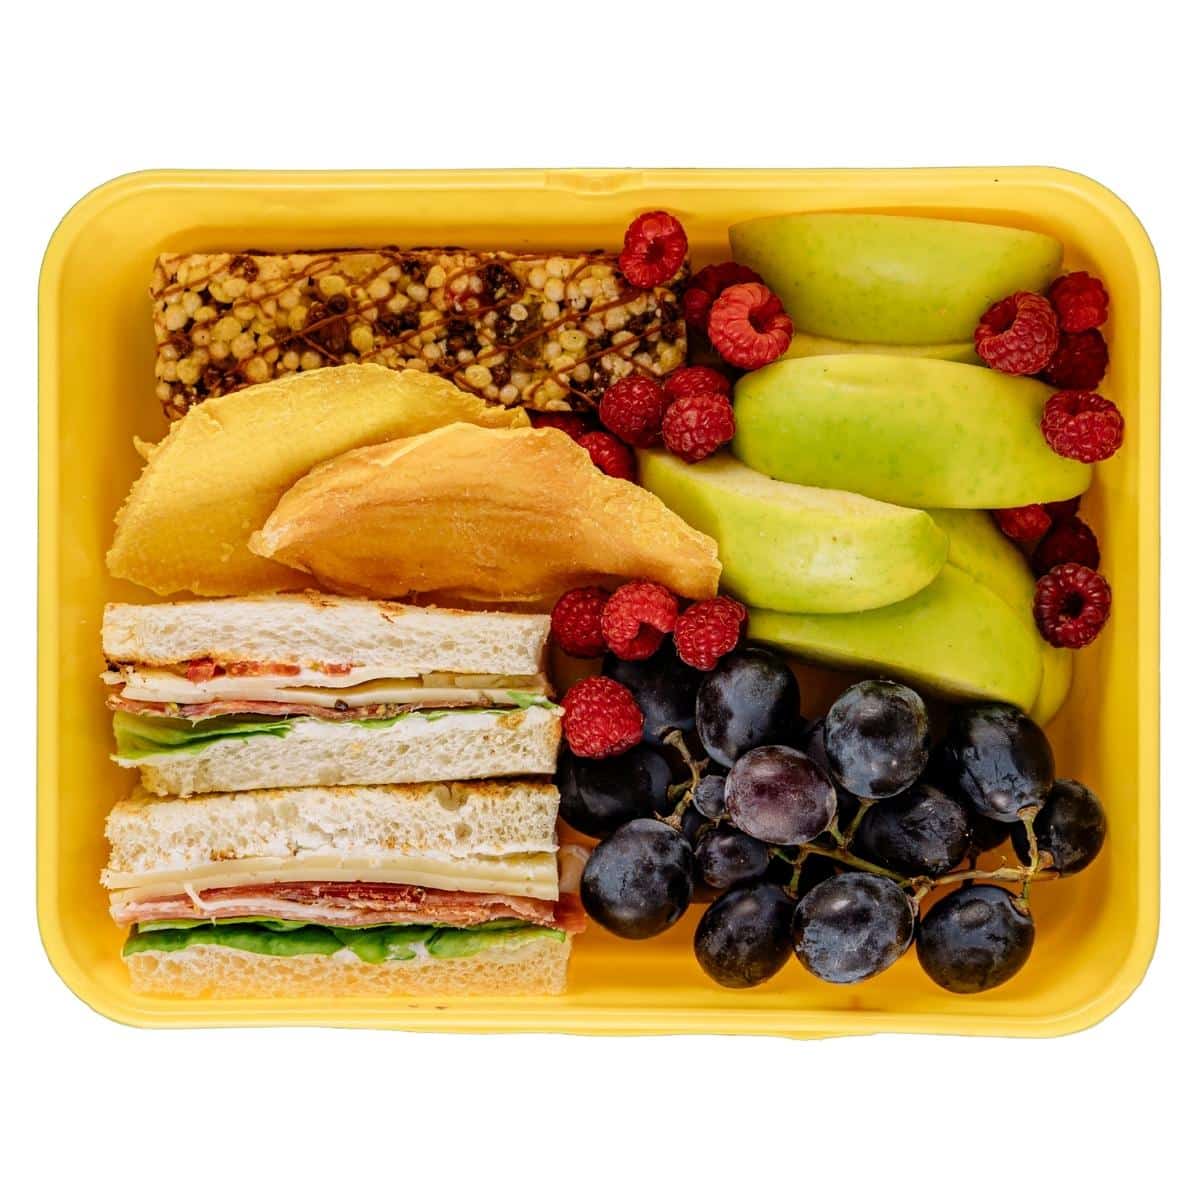 Lunch Box with Fruit and Sandwiches